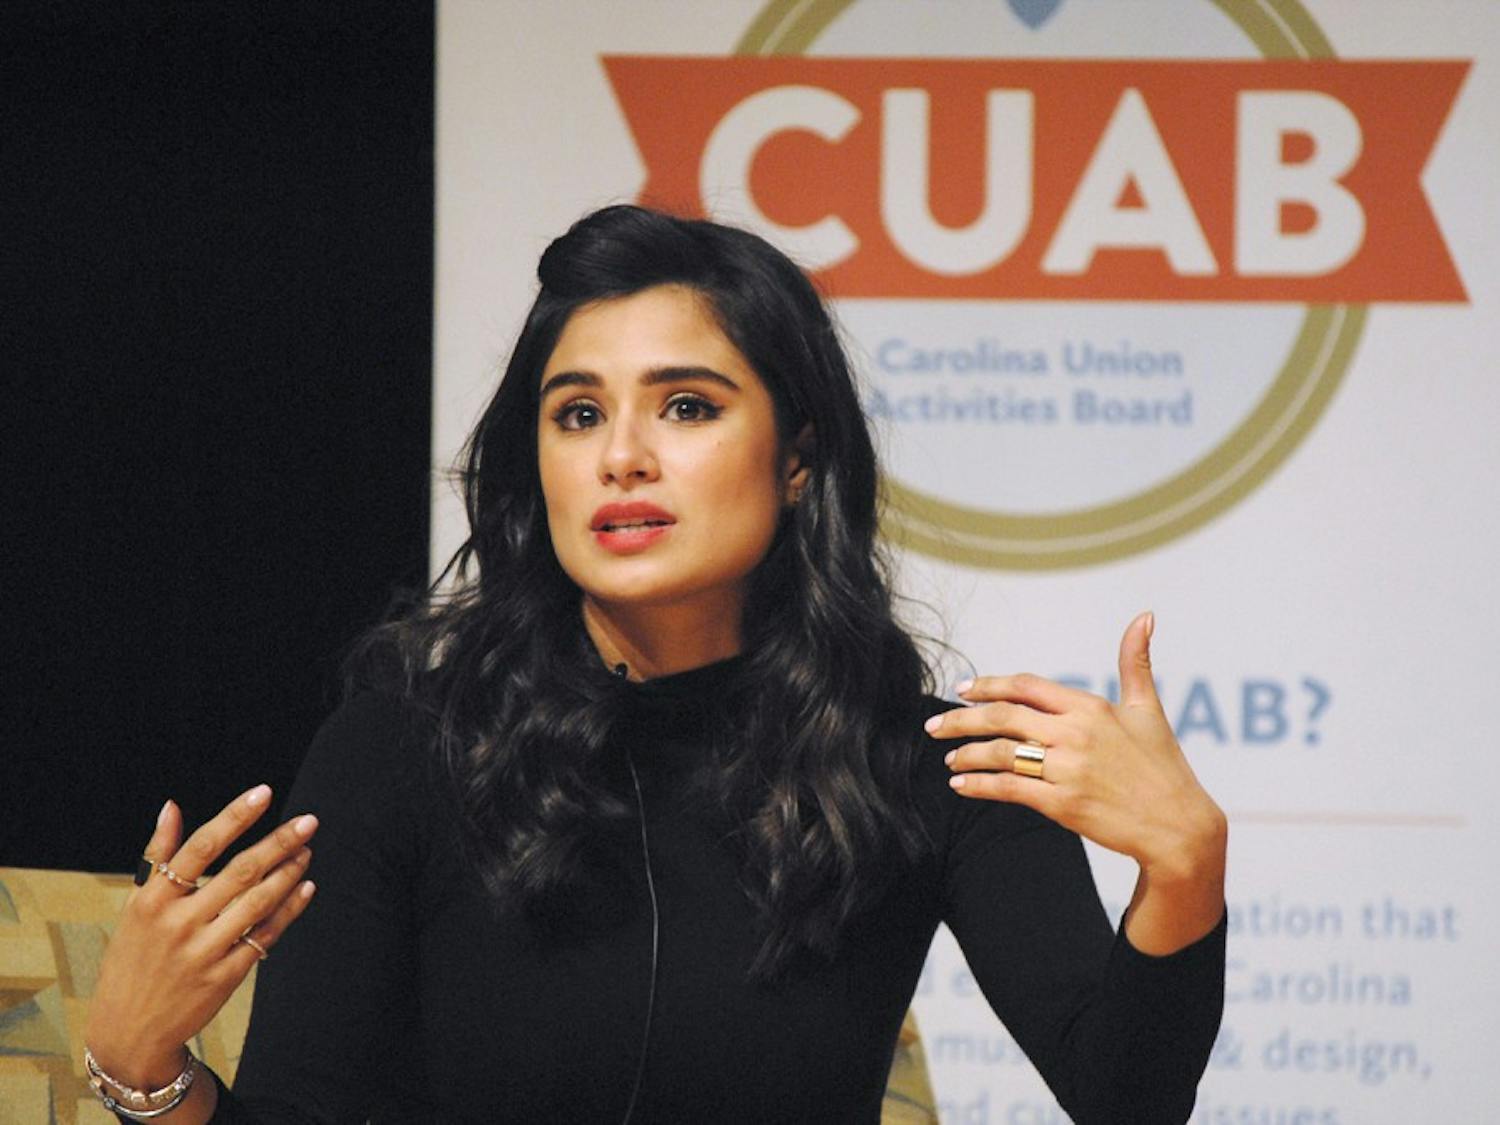 Diane Guerrero speaks at the Great Hall in&nbsp;the Student Union about her personal experiences and immigration reform.&nbsp;